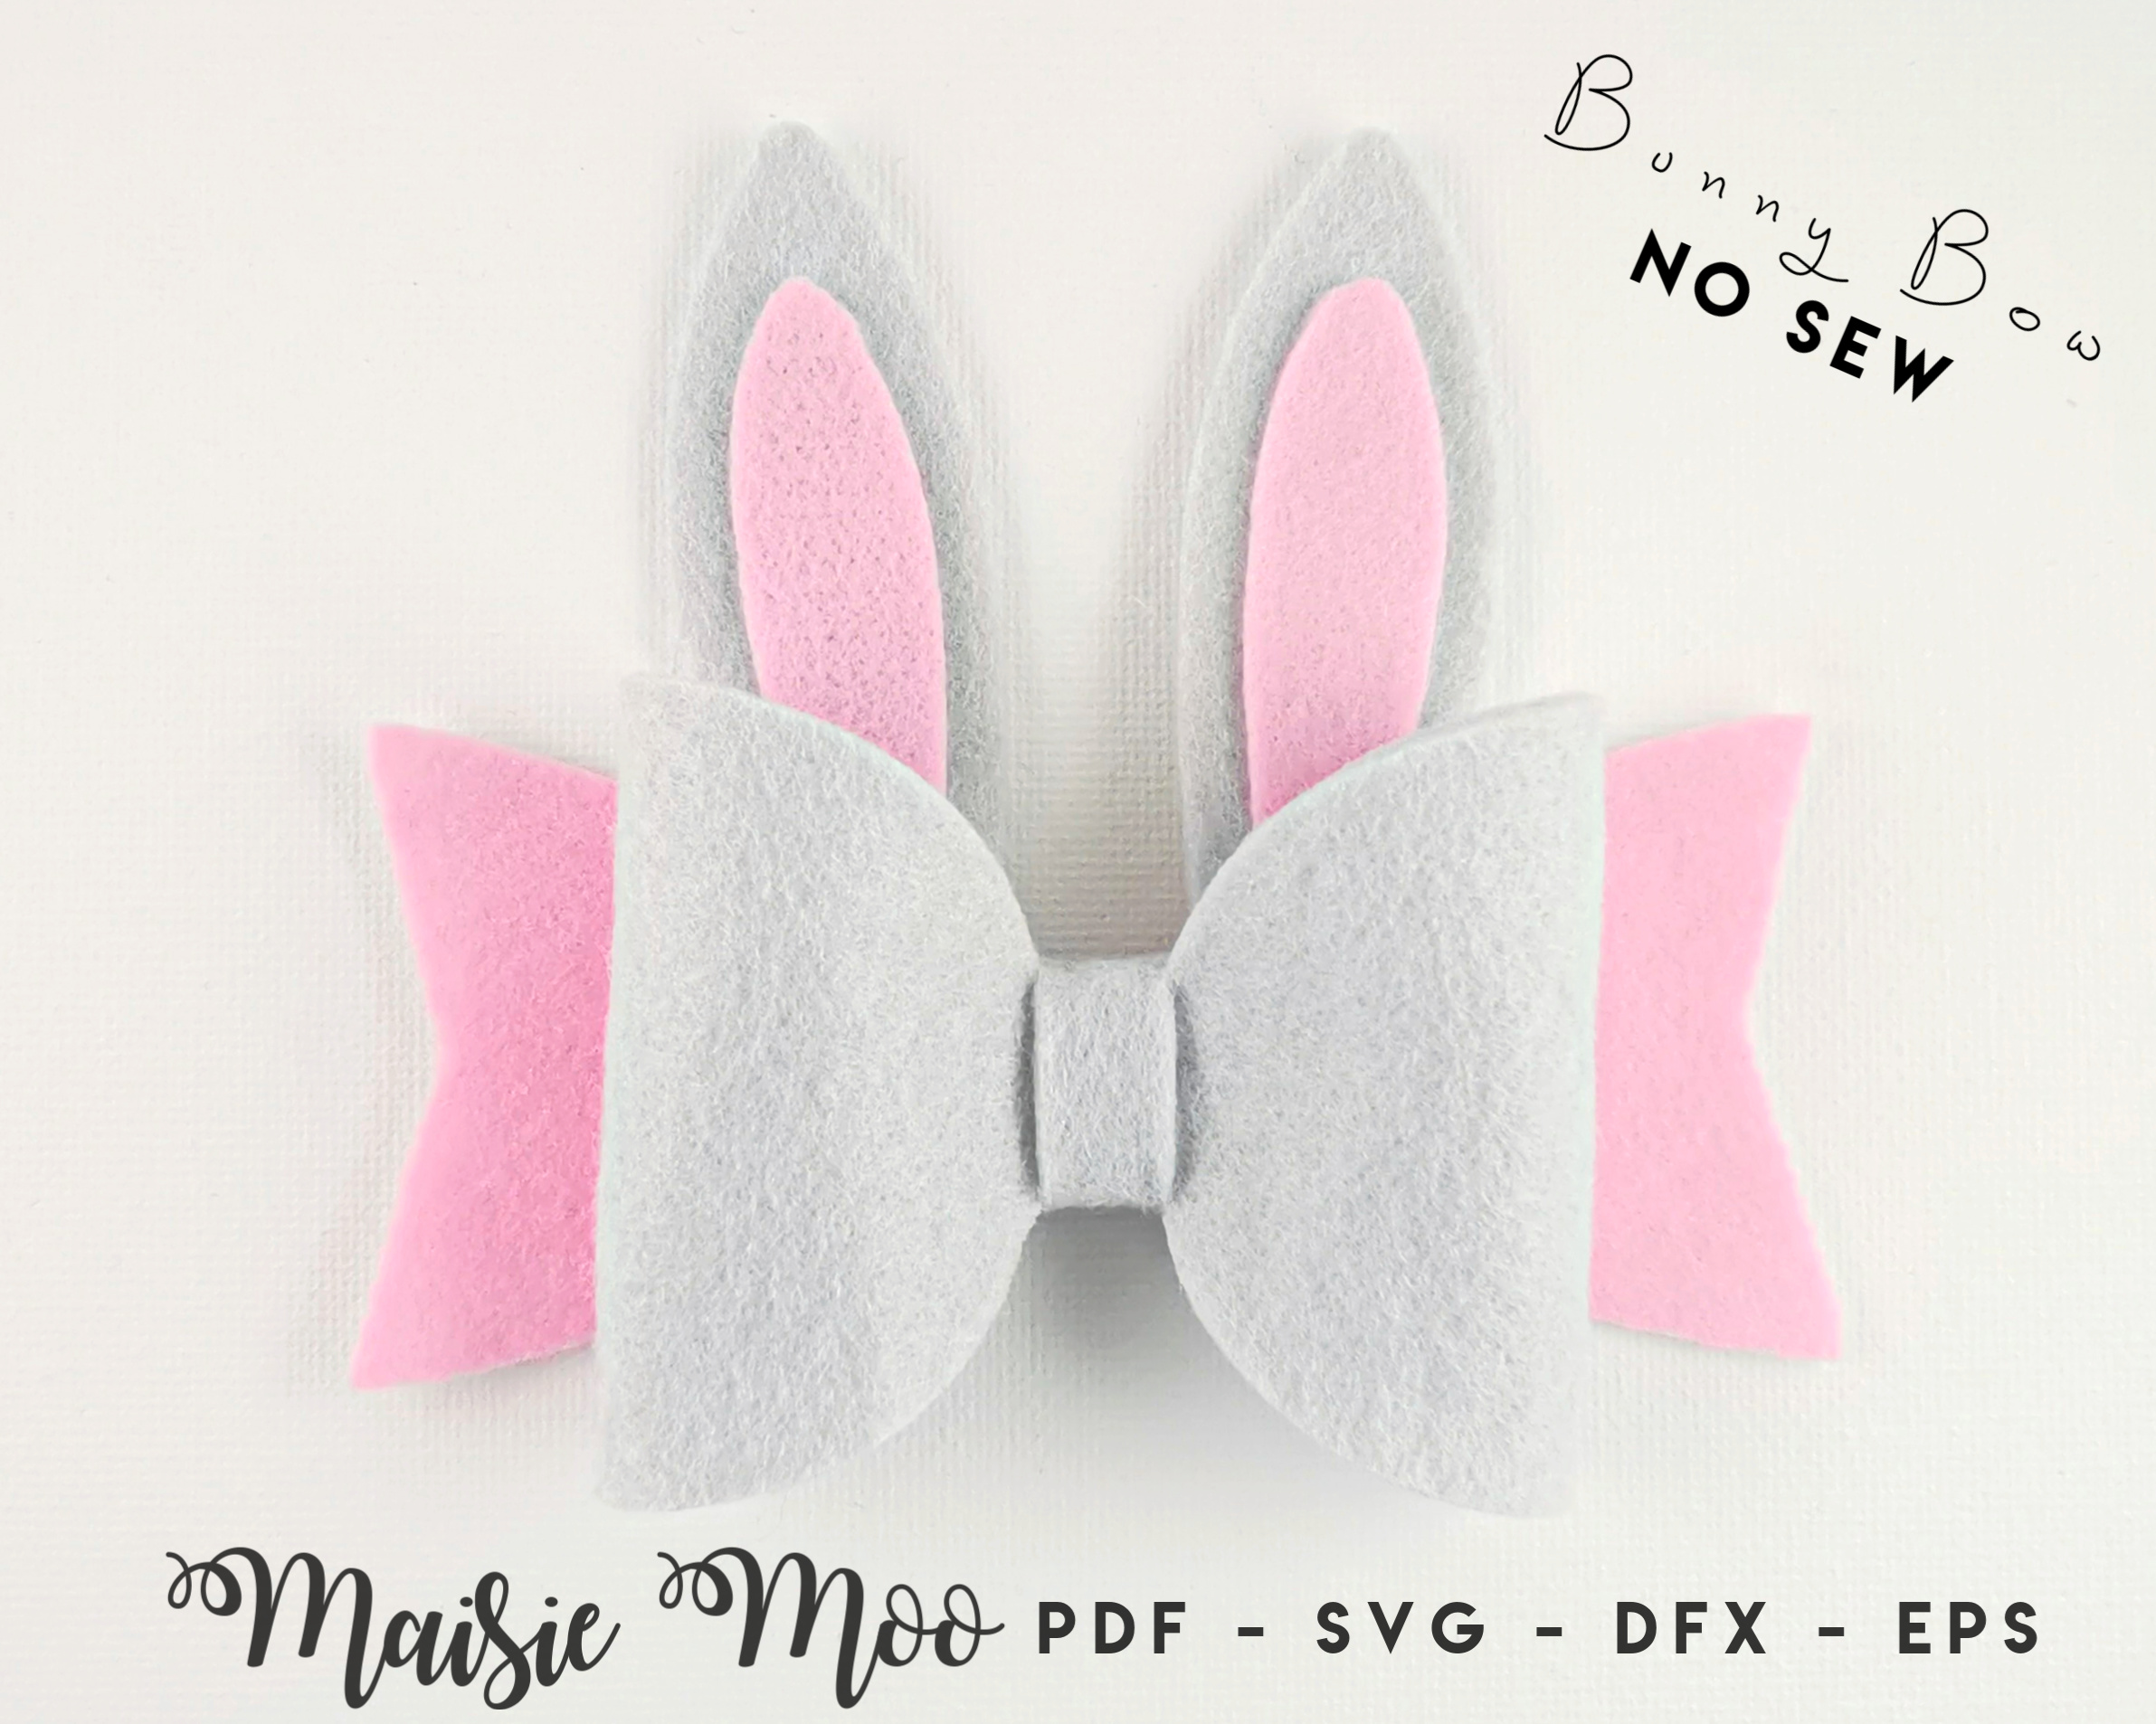 Download Bunny Bow SVG, Felt Rabbit Bow PDF, Easter Hair Bow Template